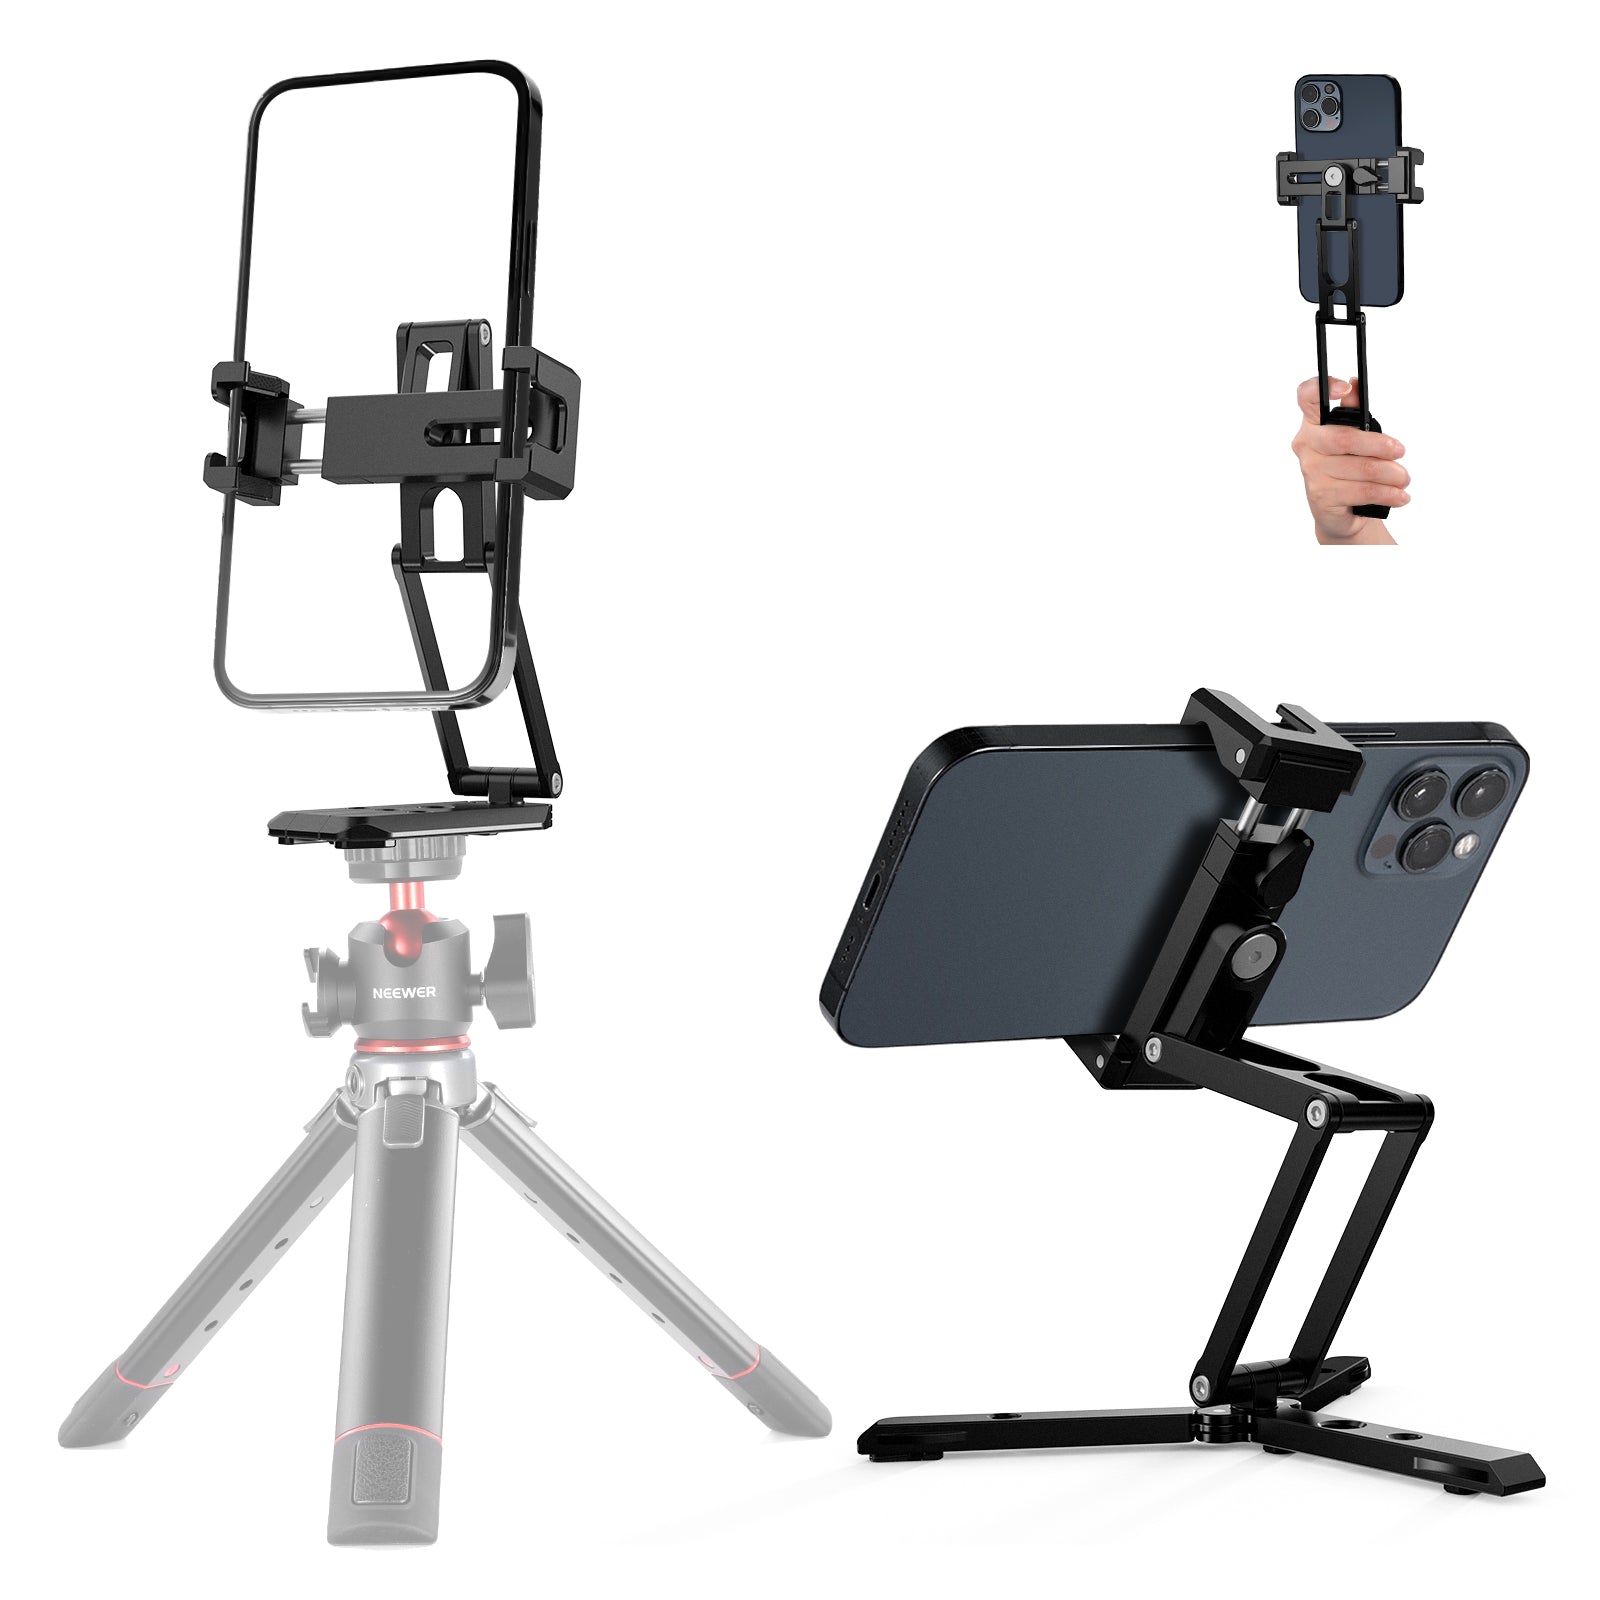 NEEWER SP-04 Phone Tripod Mount with Cold Shoes